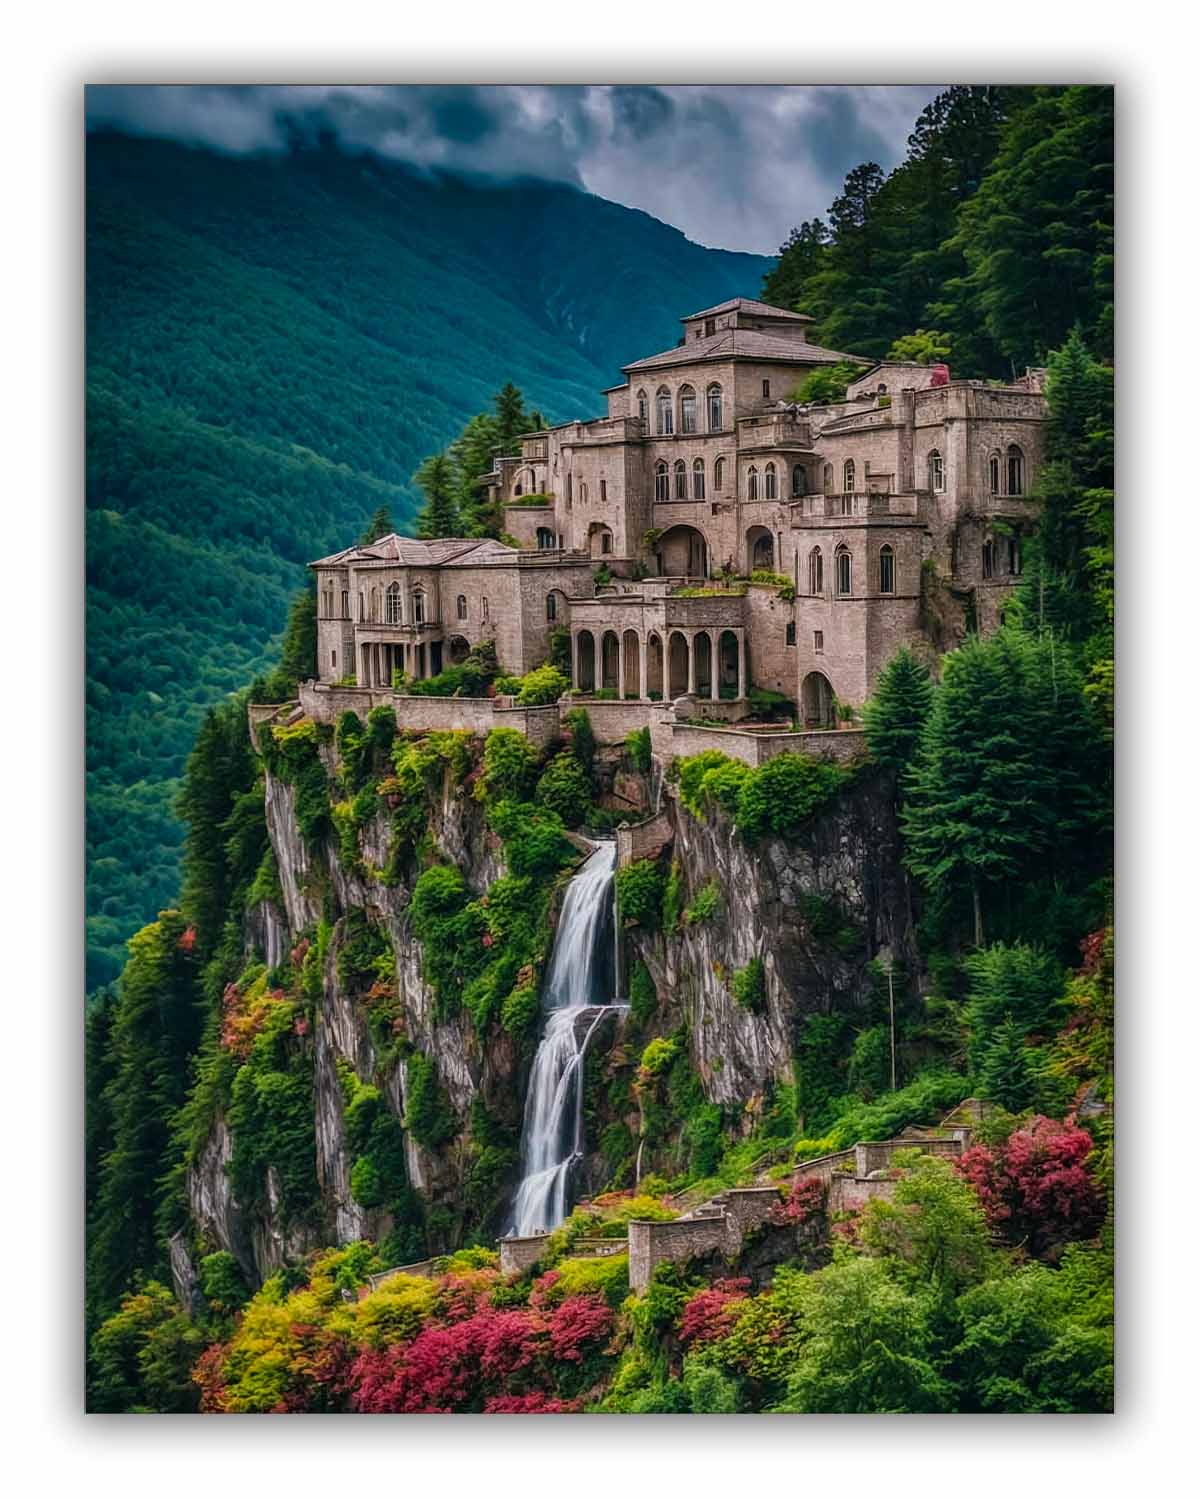 Fine Art Canvas Print, front view. "Living Dream" the image shows an imposing castle on the edge of a cliff, also below the castle there is a waterfall and surrounding trees that contrast with the incredible view.